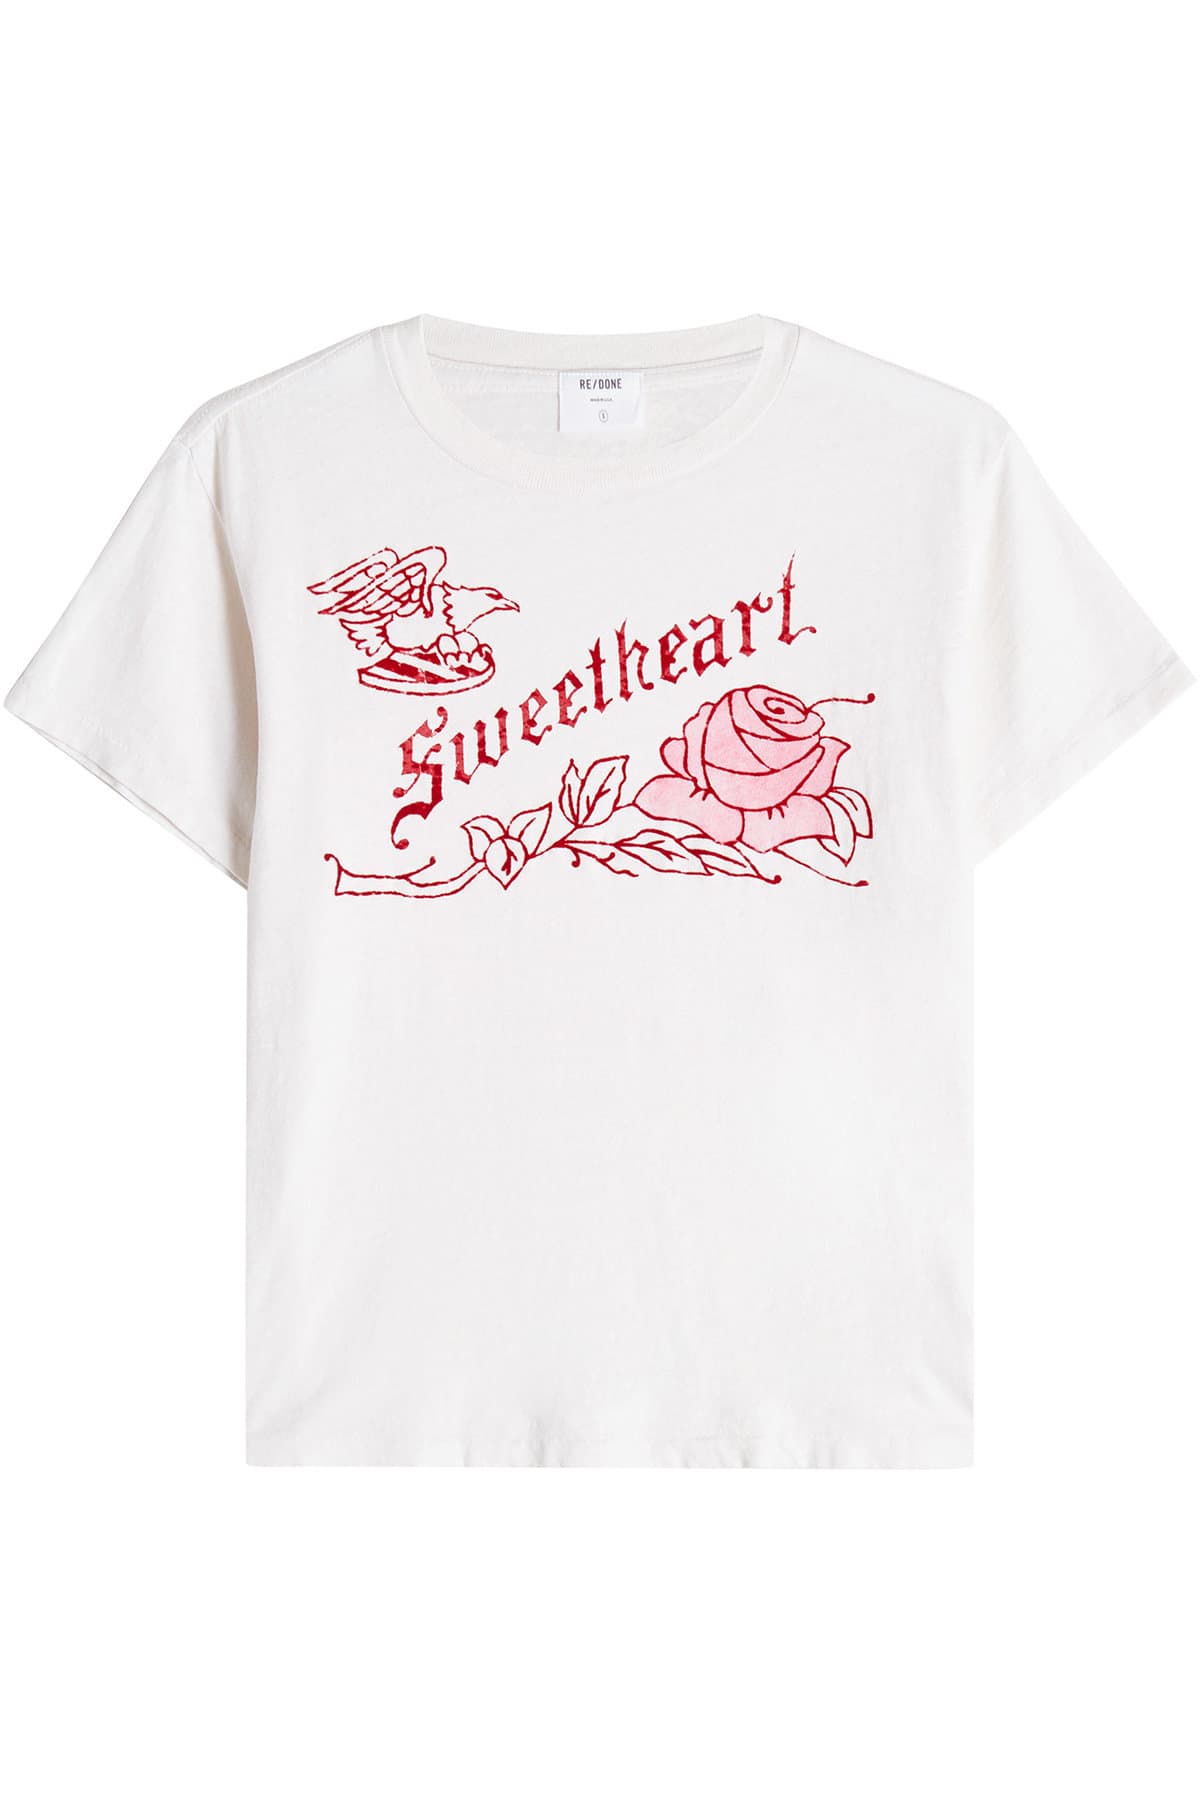 RE/DONE - Sweetheart Printed Cotton T-Shirt